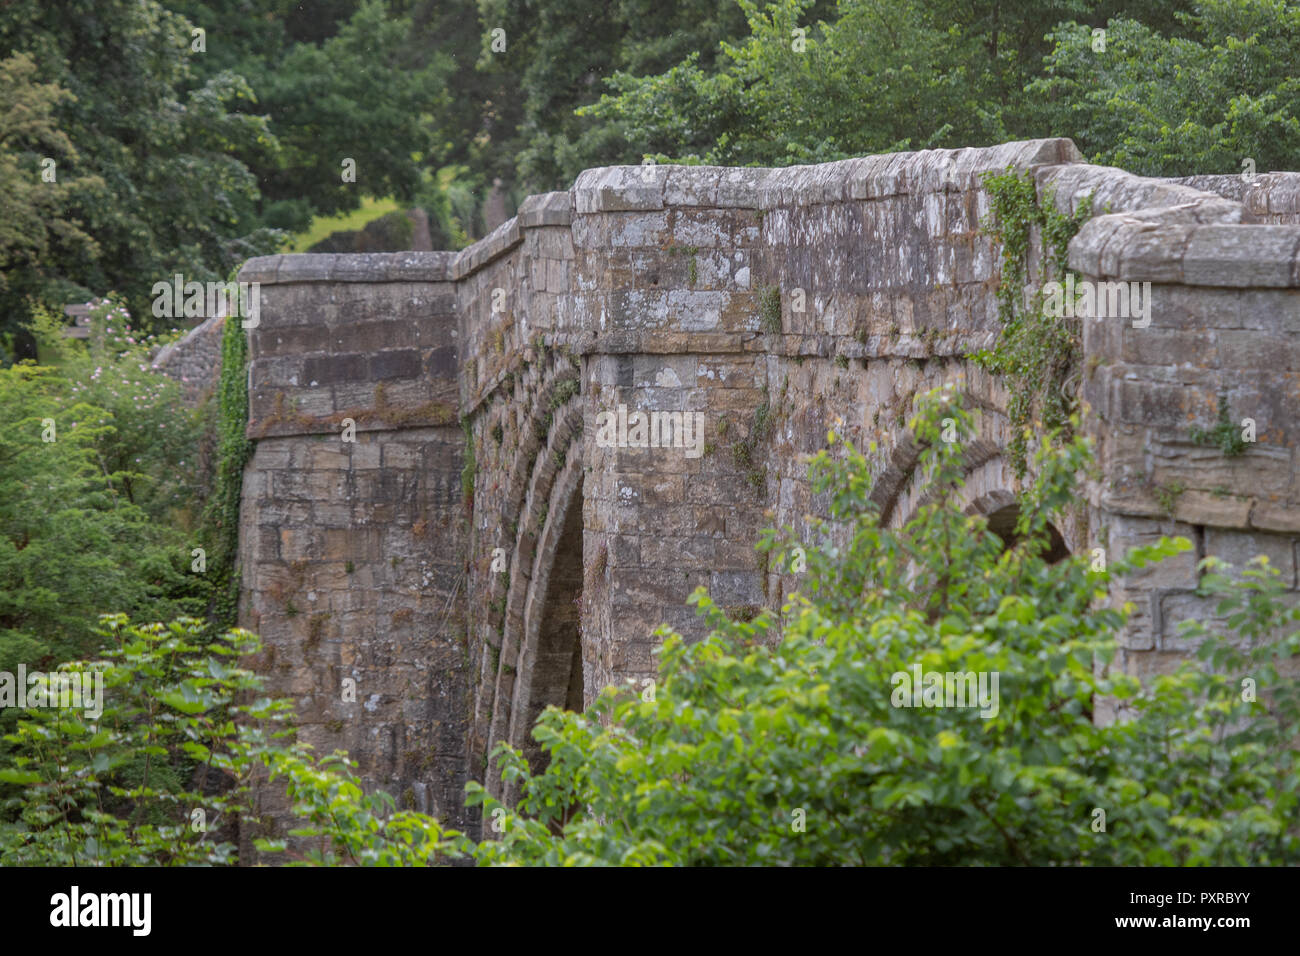 Mosses and other vegetation creep up the walls of an aged stone bridge in Kirkby Lonsdale, Cumbria , UK Stock Photo